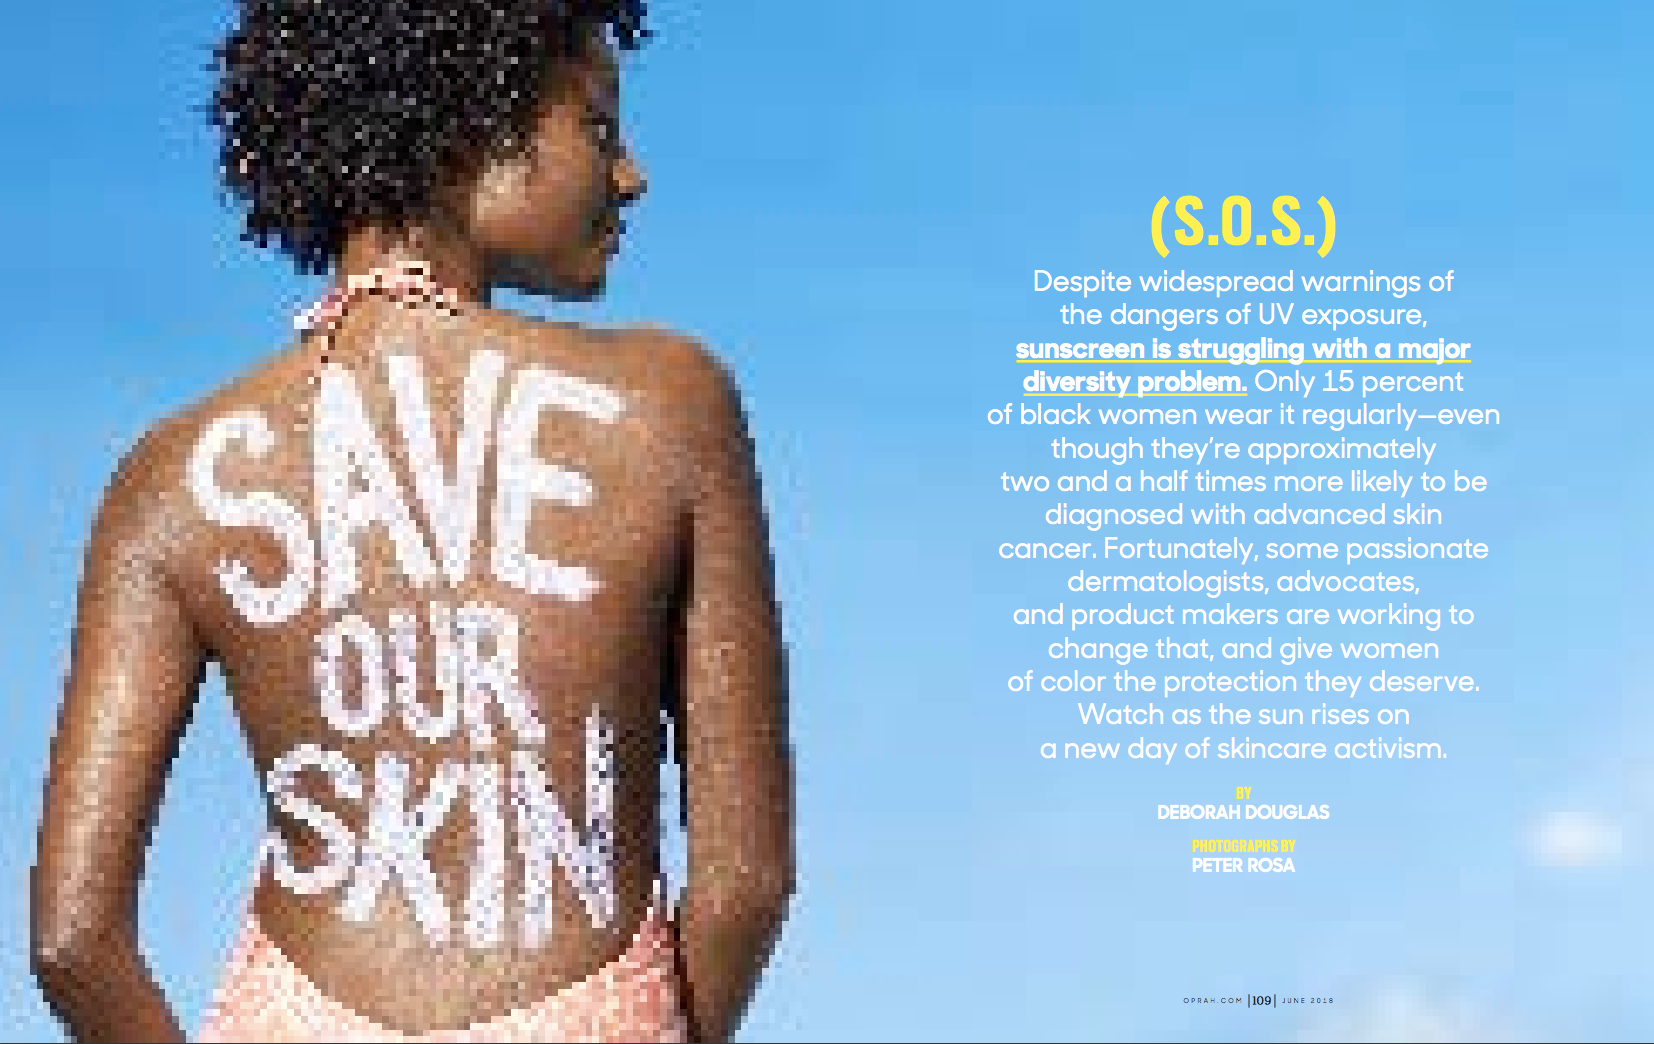 I wrote the featured beauty/health story for the June 2018 issue of Oprah magazine. Turns out, sunscreen is necessary for darker skin tones, and companies, organizations and enterprising women are doing a lot to take care of darker skin tones and keep them healthy.